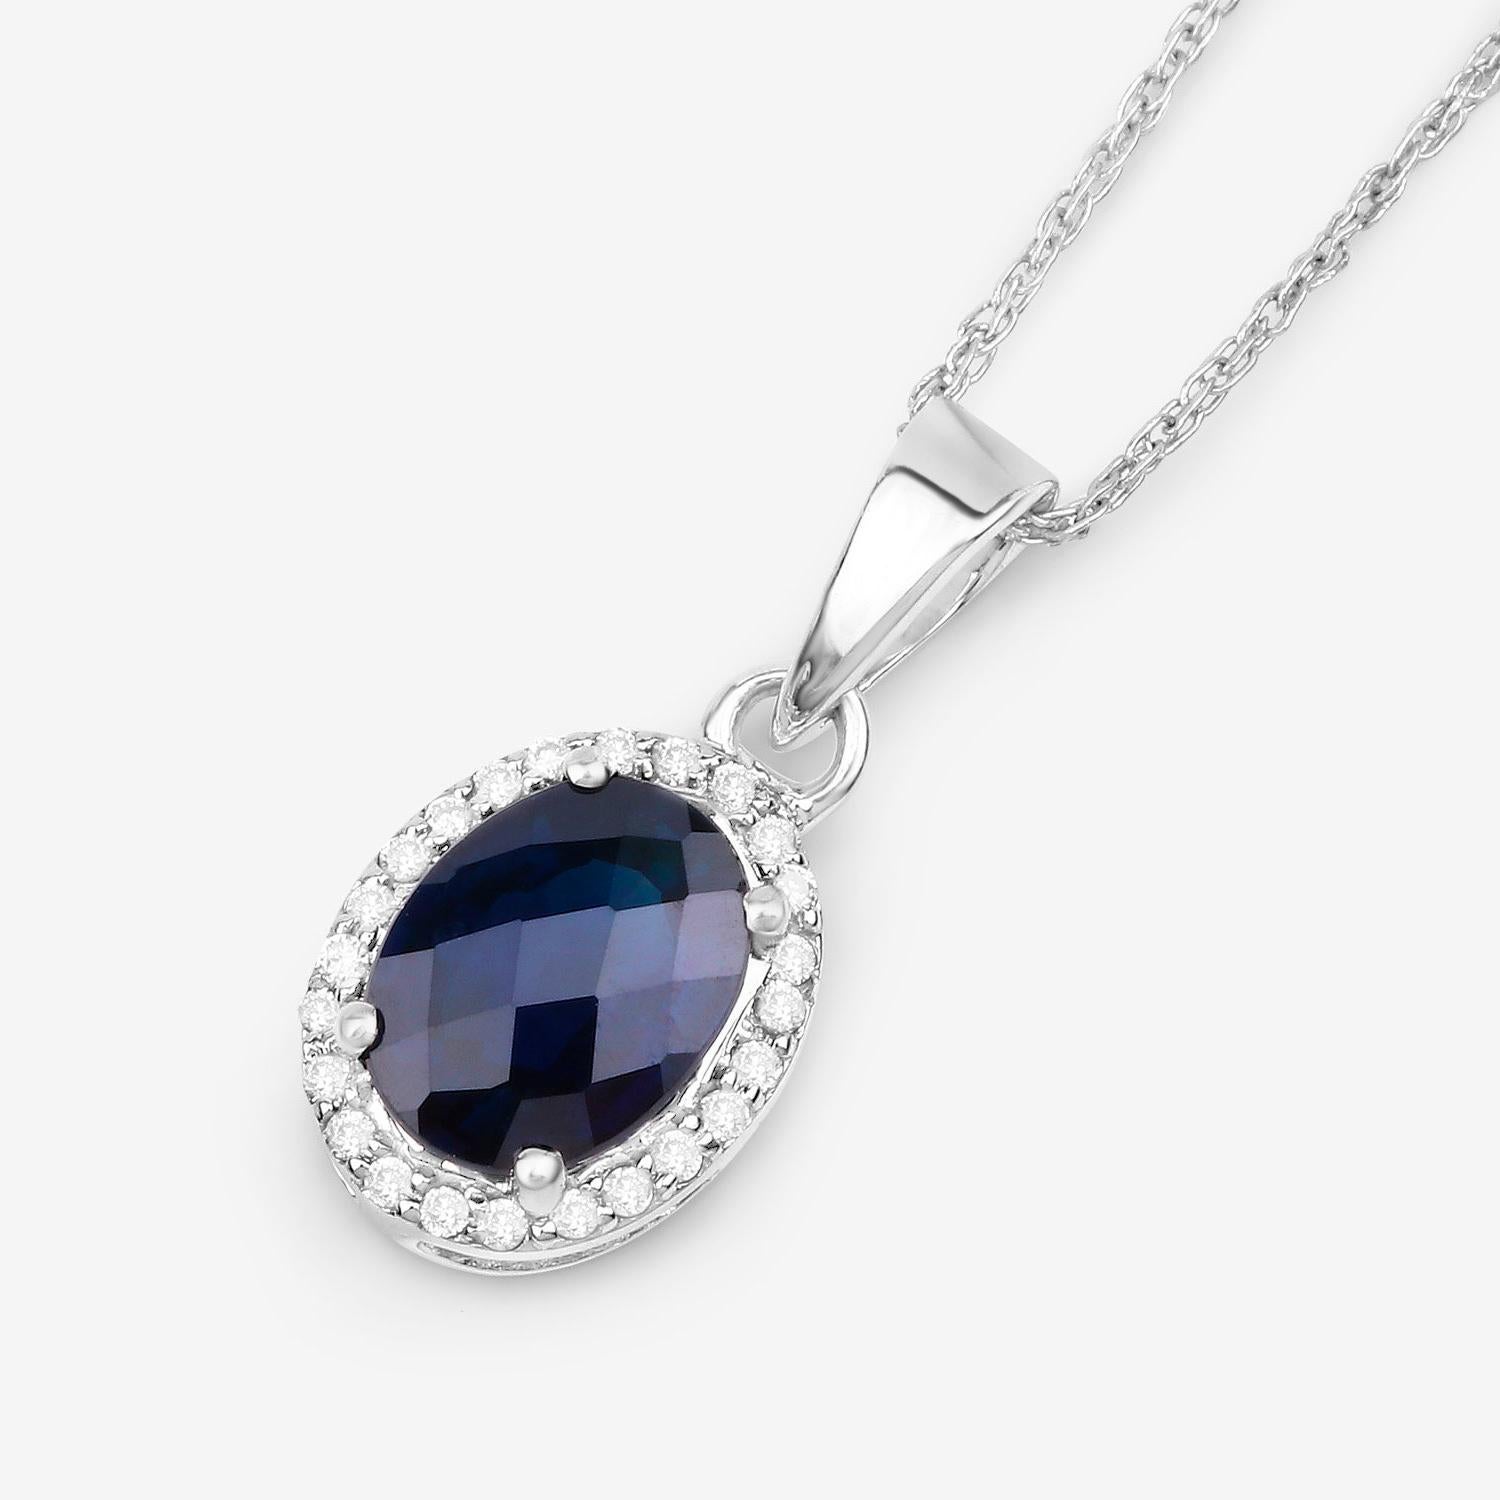 Blue Sapphire Necklace With Diamond Halo 1.66 Carats 14K White Gold In Excellent Condition For Sale In Laguna Niguel, CA